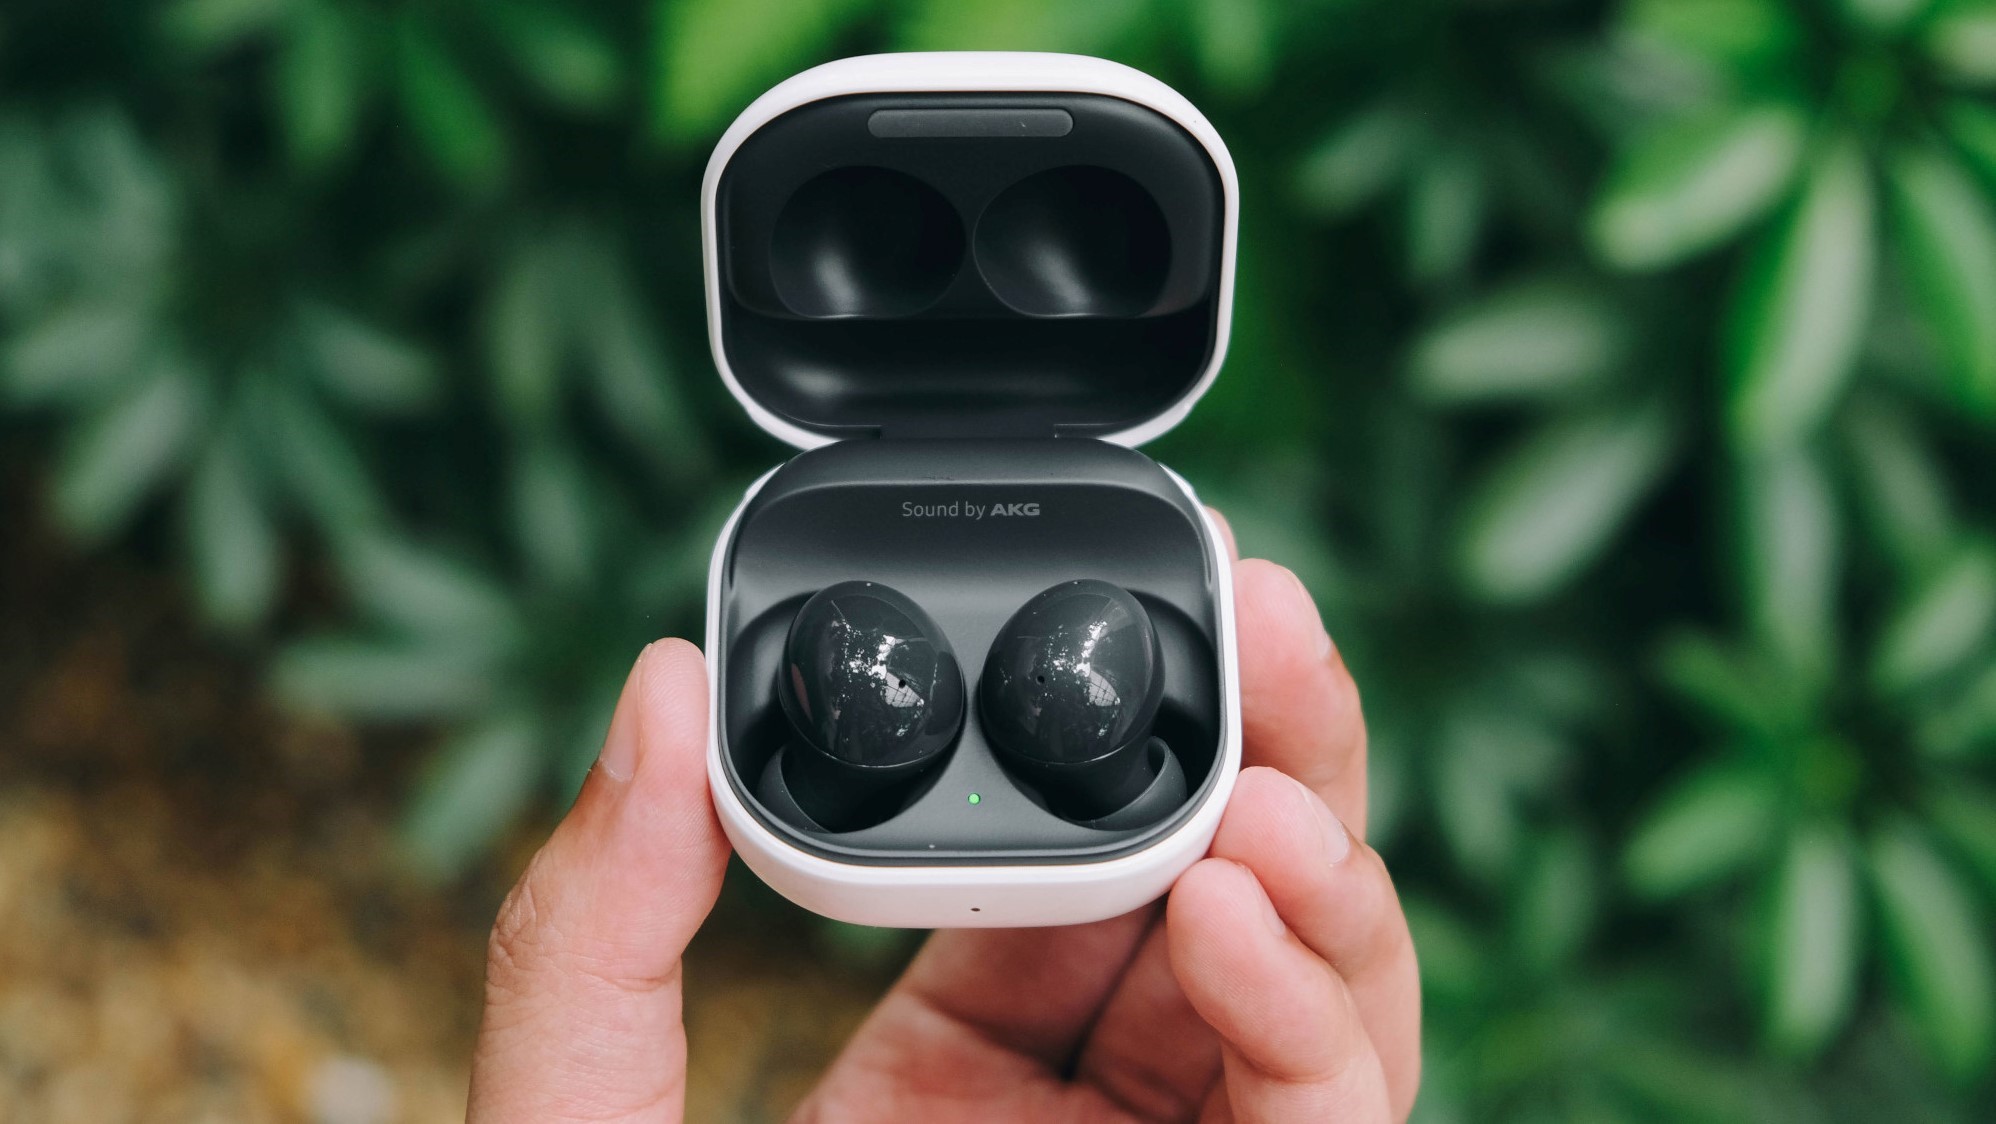 Samsung Galaxy Buds FE details leak, images in tow -  news